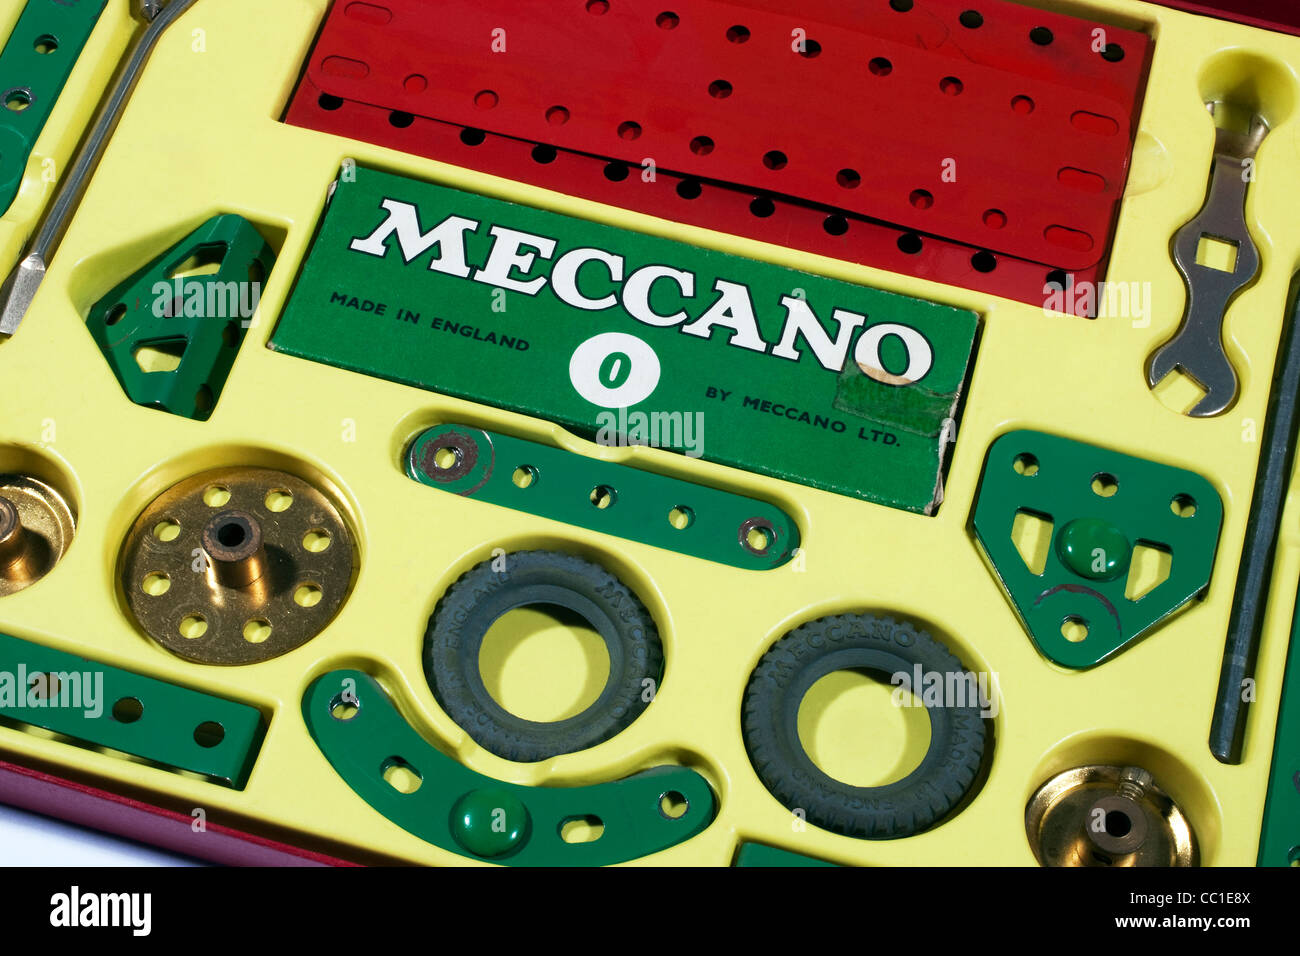 Meccano construction parts used to build working models and mechanical devices invented by Frank Hornby in 1901 Stock Photo